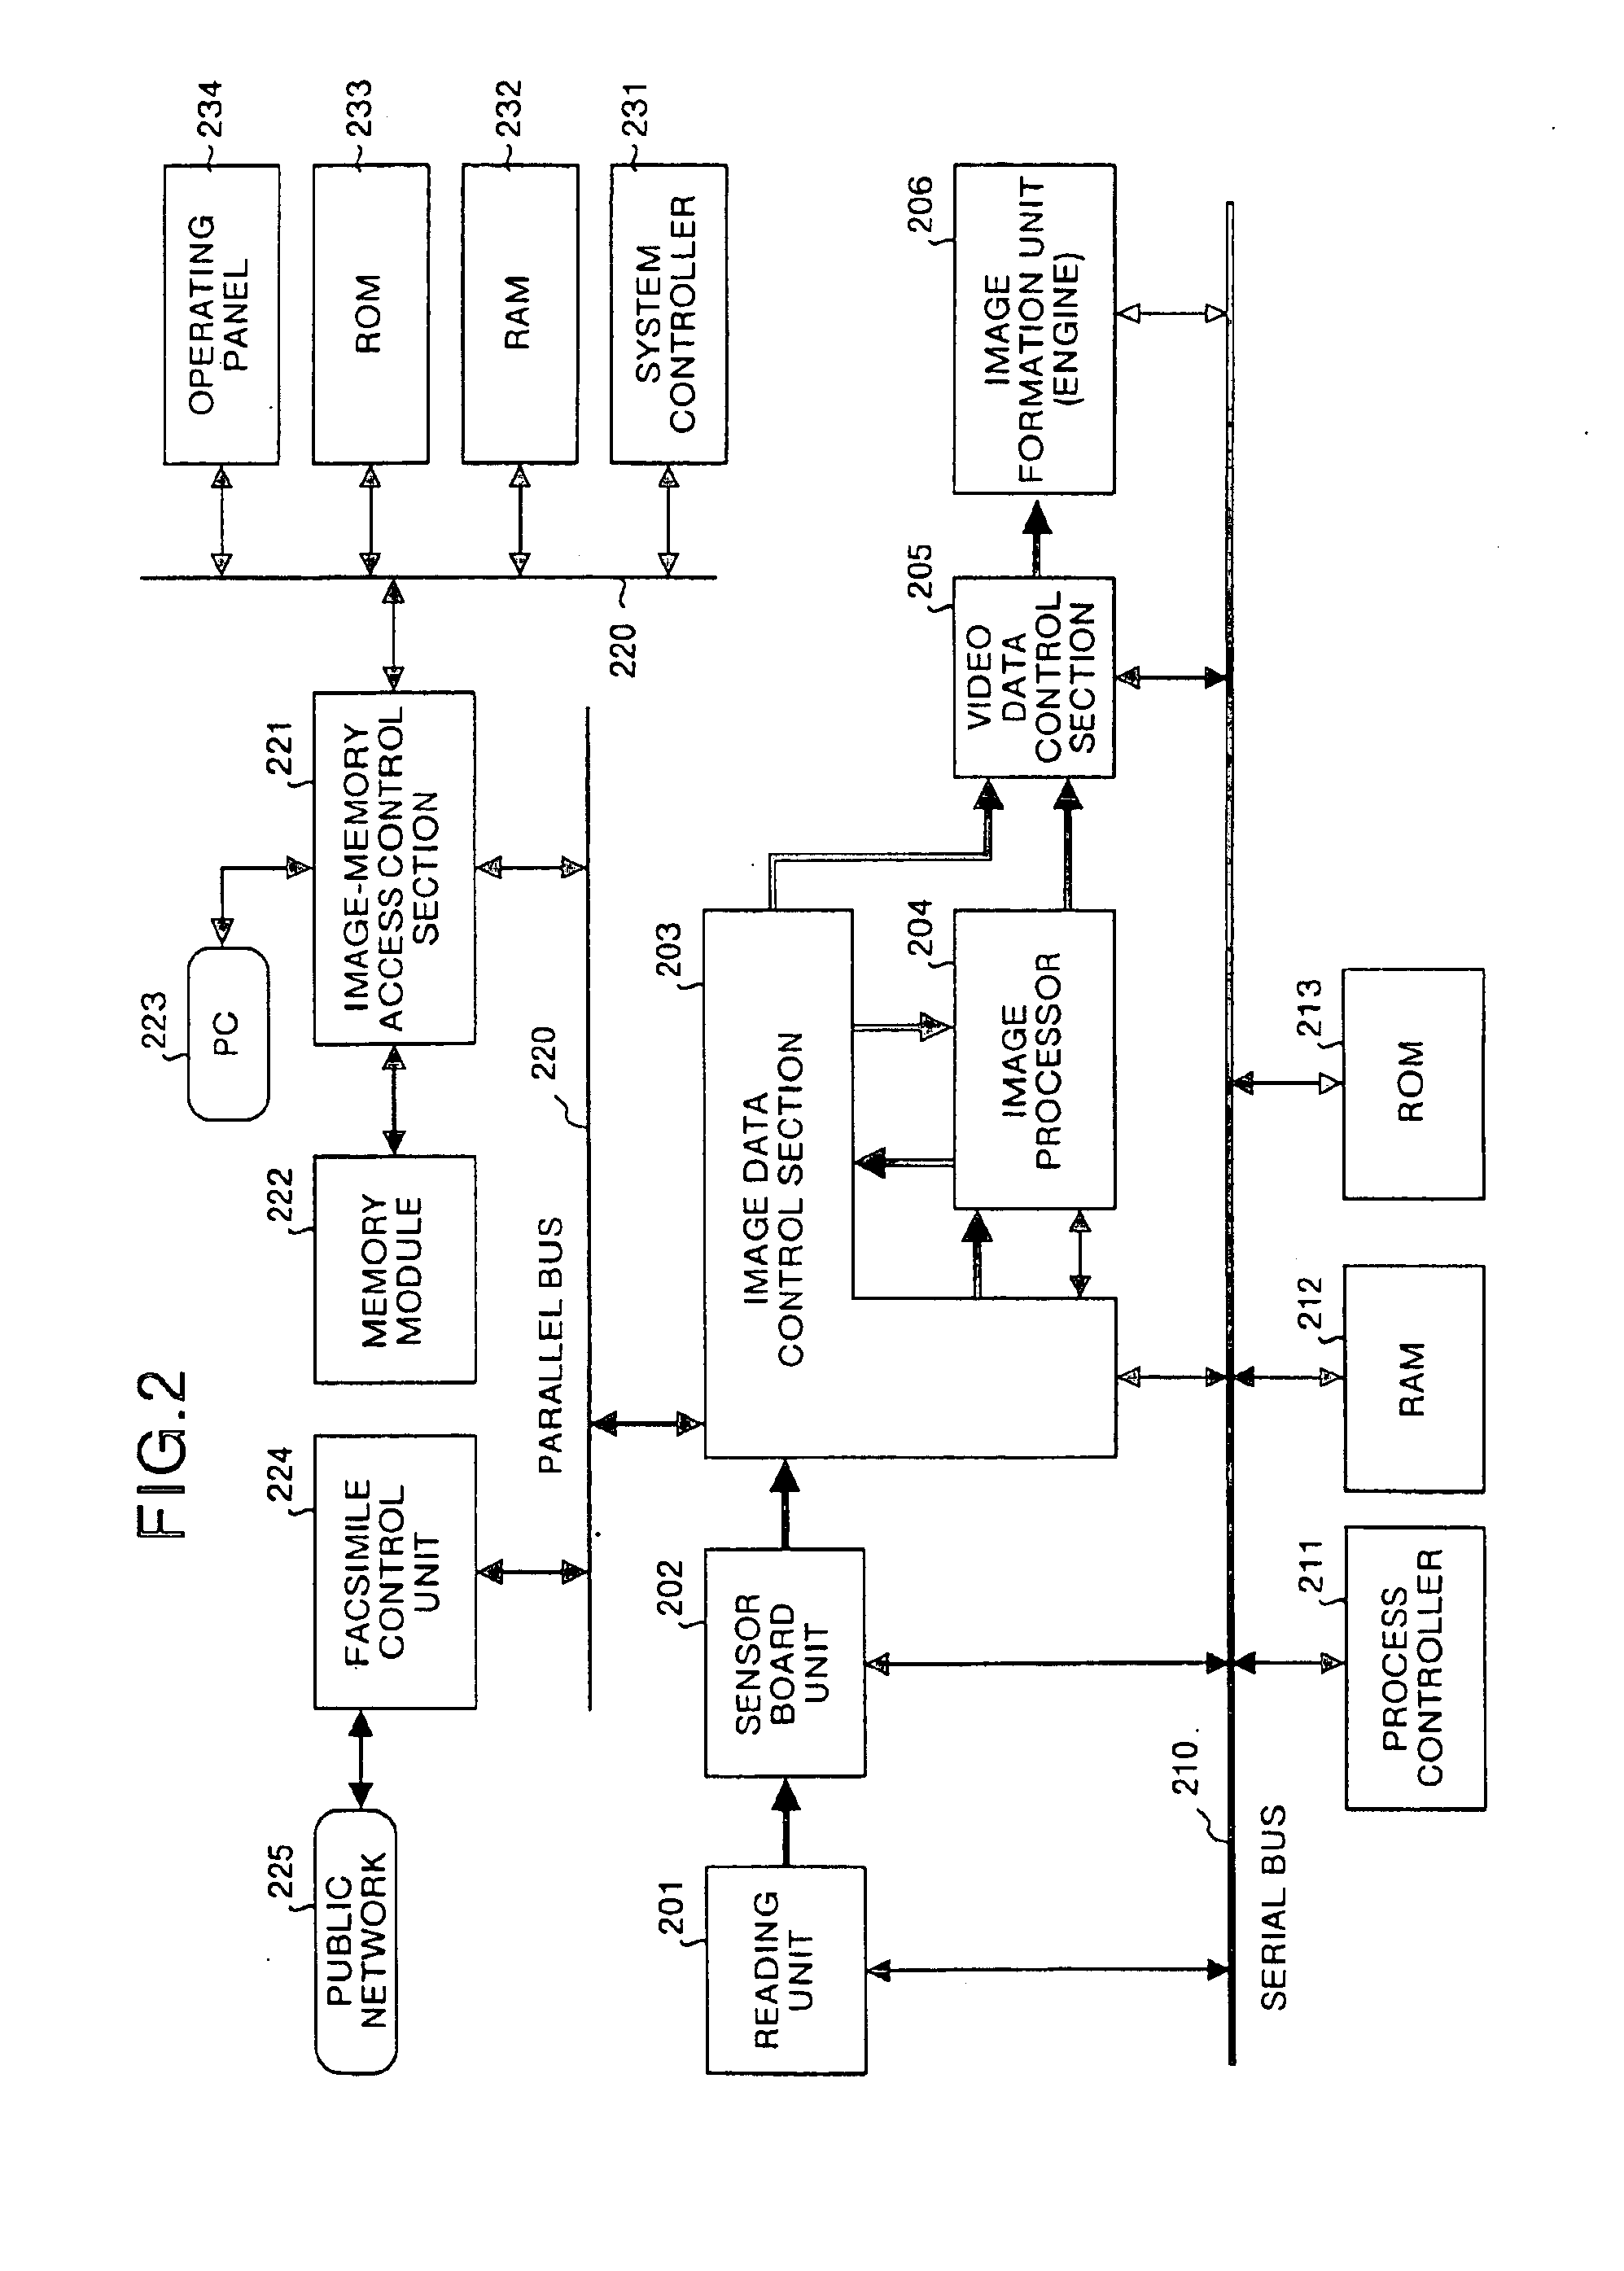 Image processing apparatus, method for adding or updating sequence of image processing and data for image processing in the image processing apparatus, and computer-readable recording medium where program for making computer execute the method is recorded